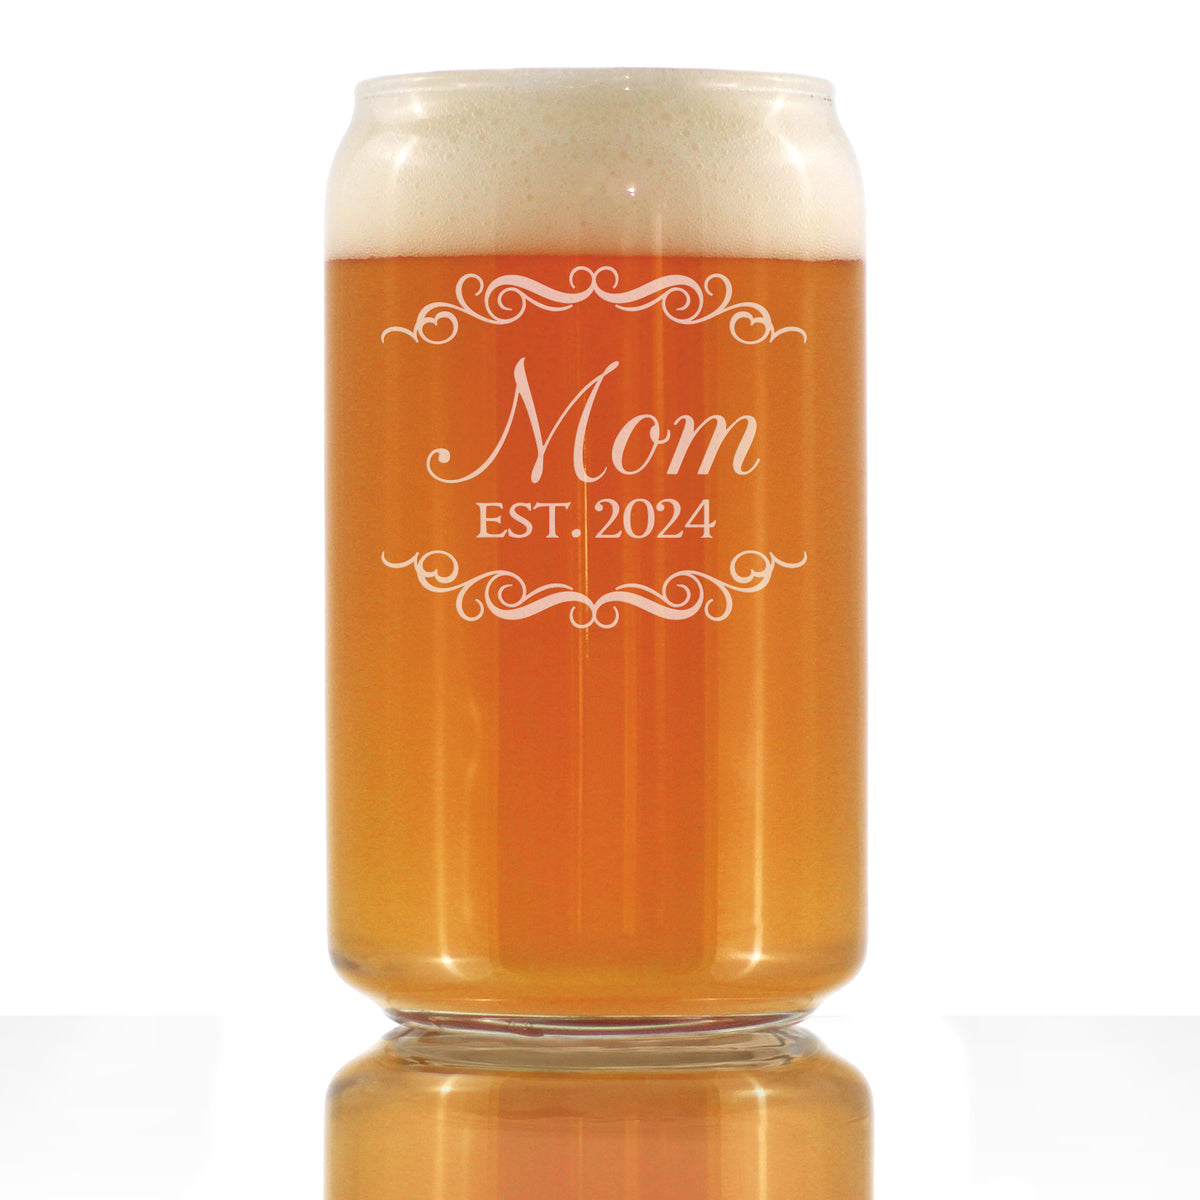 Mom Est 2024 - New Mother Beer Can Pint Glass Gift for First Time Parents - Decorative 16 Oz Glasses